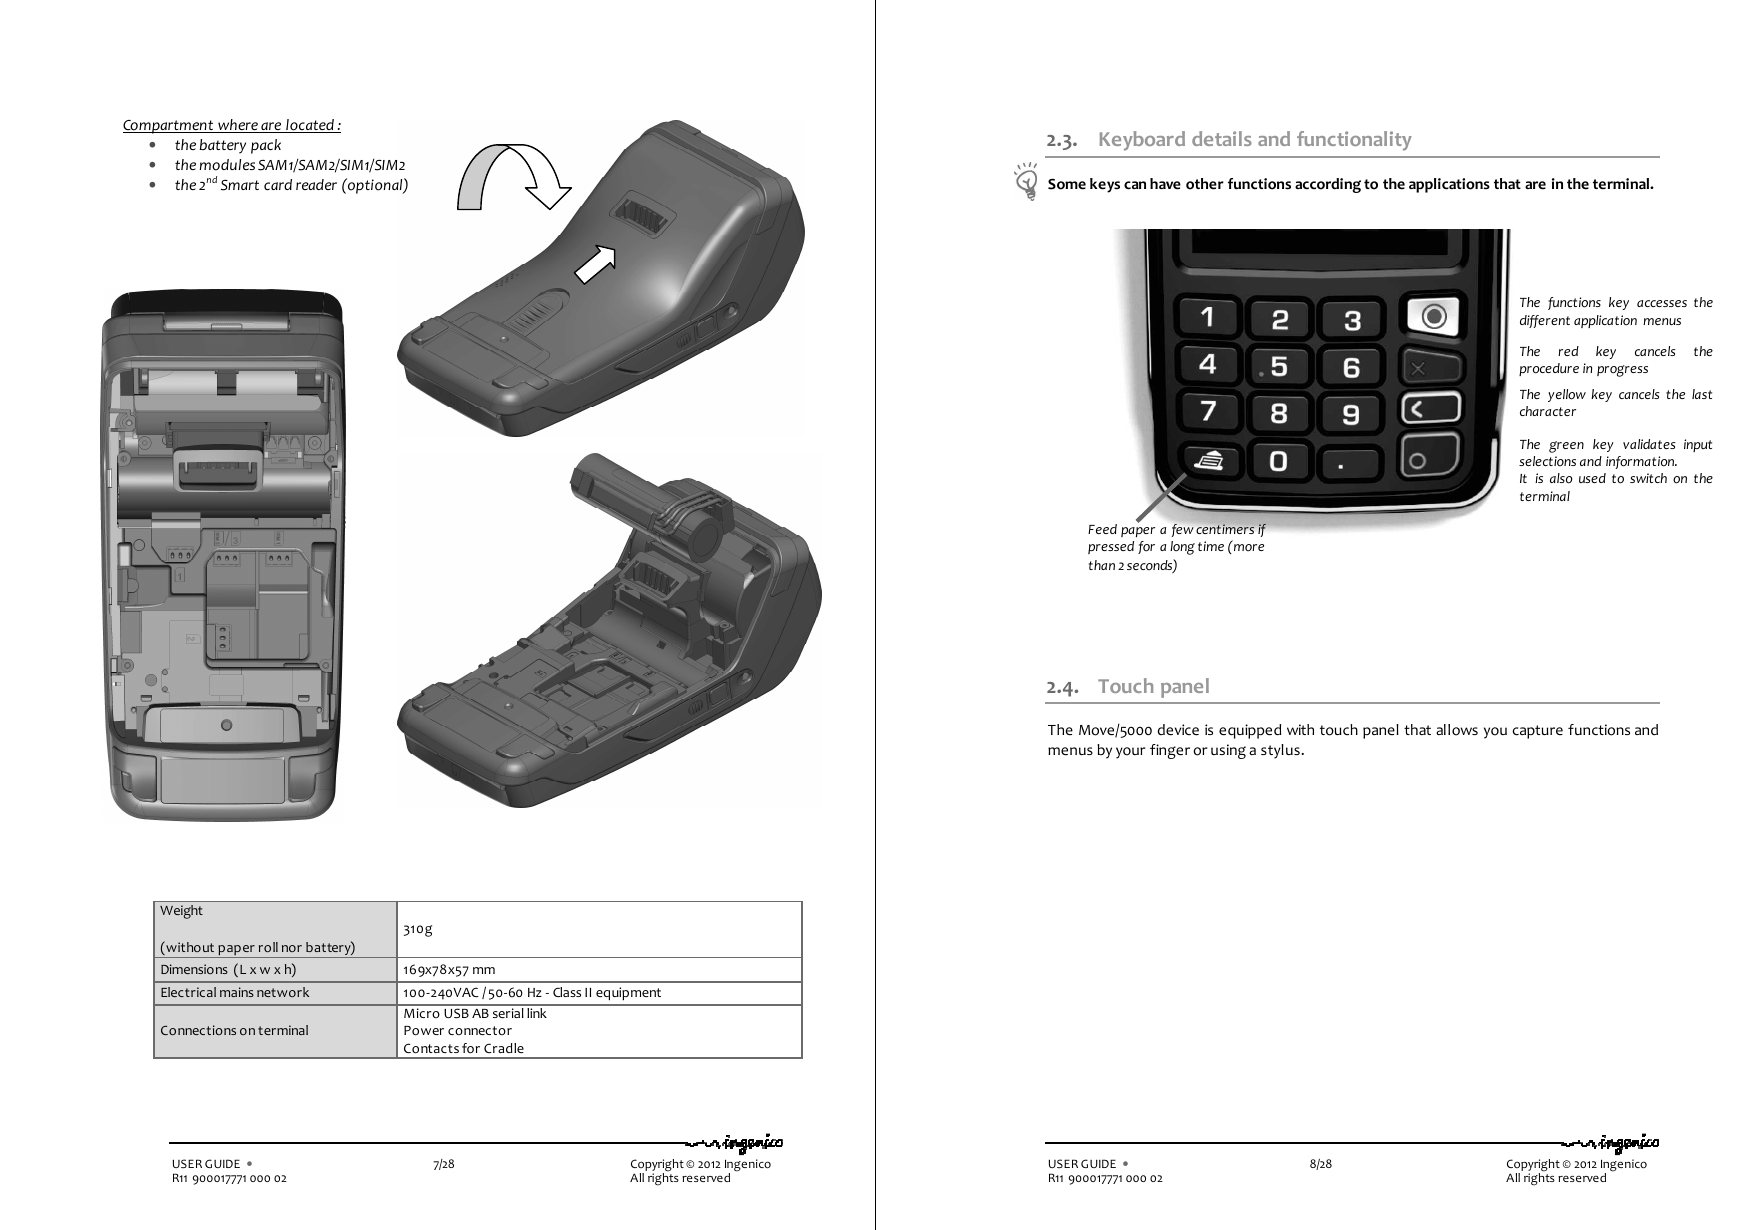   USER GUIDE  •    7/28        Copyright © 2012 Ingenico R11 900017771 000 02          All rights reserved                                            Weight (without paper roll nor battery) 310g  Dimensions  (L x w x h)  169x78x57 mm Electrical mains network  100-240VAC / 50-60 Hz - Class II equipment Connections on terminal Micro USB AB serial link Power connector Contacts for Cradle Compartment where are located :  • the battery pack  • the modules SAM1/SAM2/SIM1/SIM2 • the 2nd Smart card reader (optional)    USER GUIDE  •    8/28        Copyright © 2012 Ingenico R11 900017771 000 02          All rights reserved  2.3. Keyboard details and functionality  Some keys can have other functions according to the applications that are in the terminal.                         2.4. Touch panel The Move/5000 device is equipped with touch panel that allows you capture functions and menus by your finger or using a stylus.    Feed paper a few centimers if pressed for a long time (more than 2 seconds) The  functions  key  accesses  the different application  menus The  red  key  cancels  the procedure in progress The  yellow  key  cancels  the  last character The  green  key  validates  input selections and information. It  is  also  used  to  switch  on  the terminal 